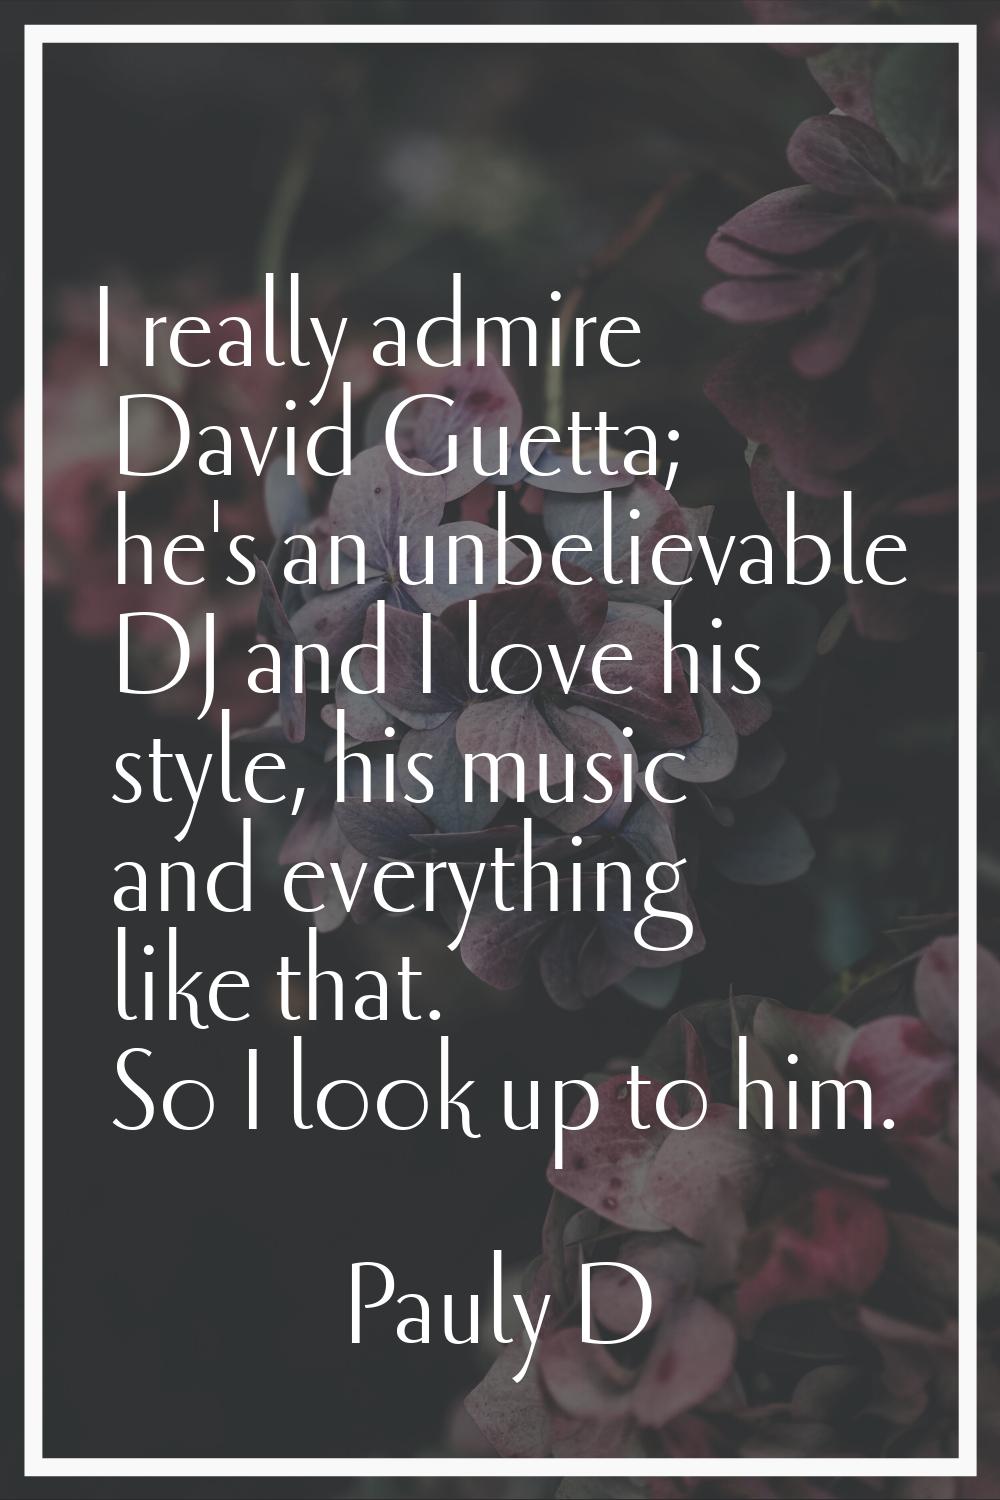 I really admire David Guetta; he's an unbelievable DJ and I love his style, his music and everythin